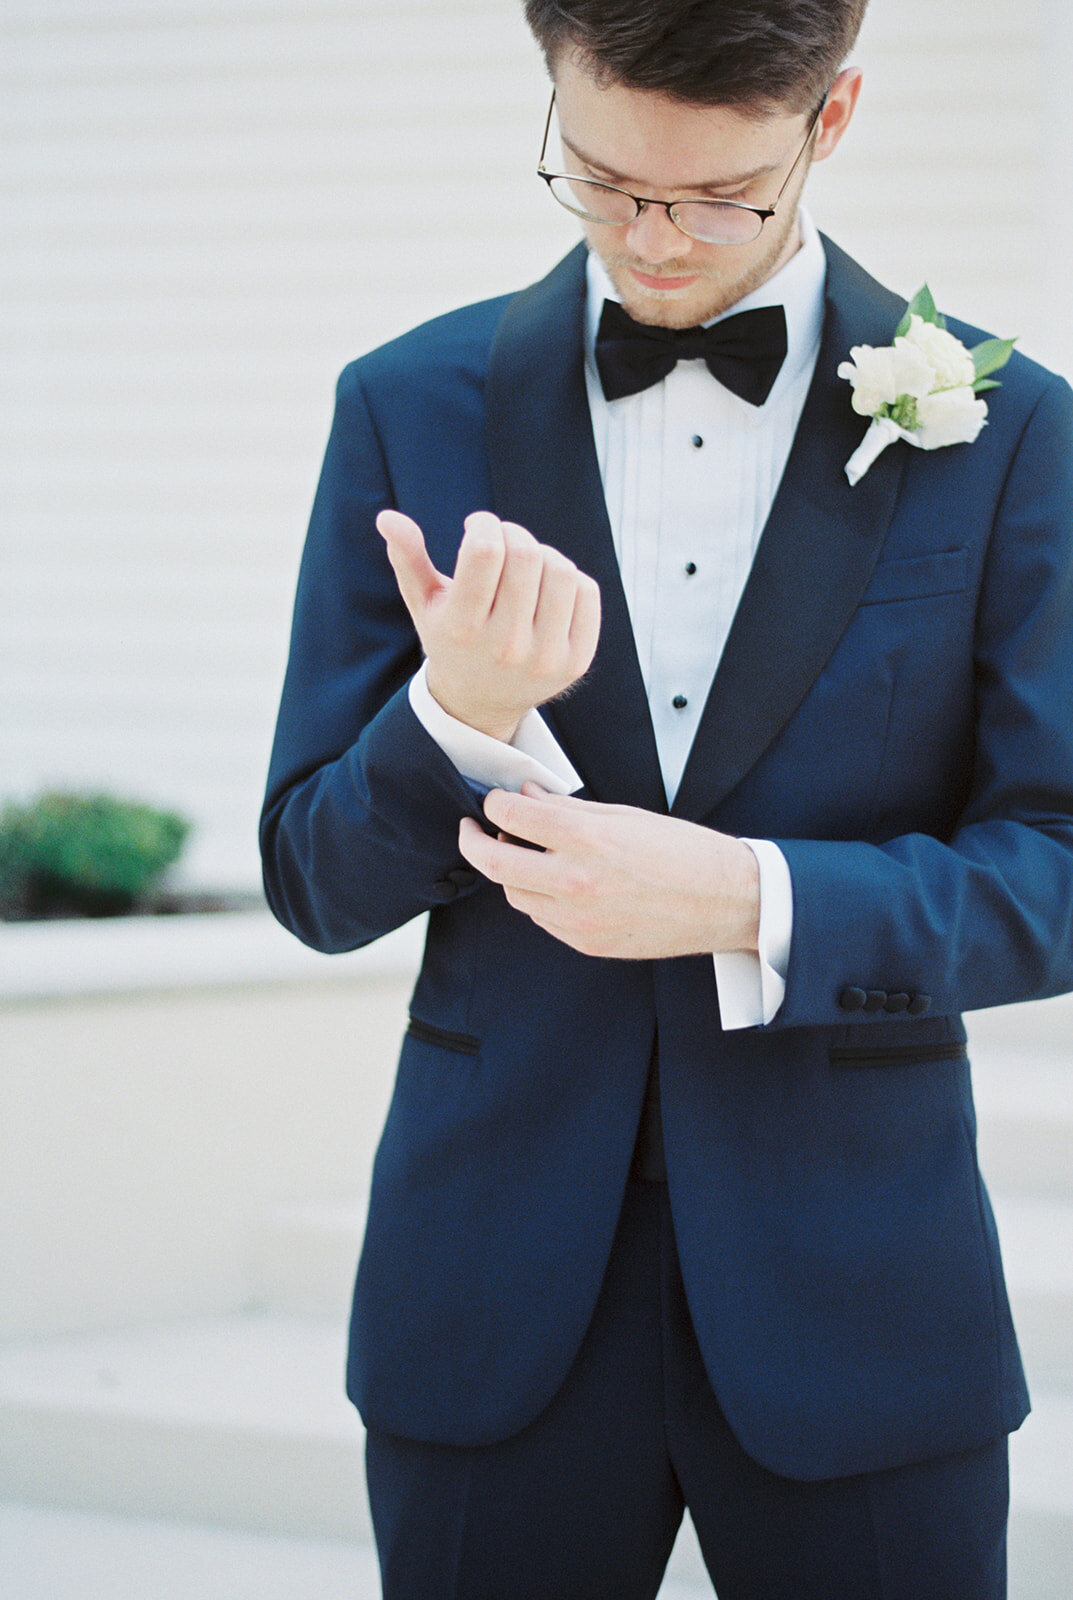 groomsmen-photos-shelby-willoughby-38